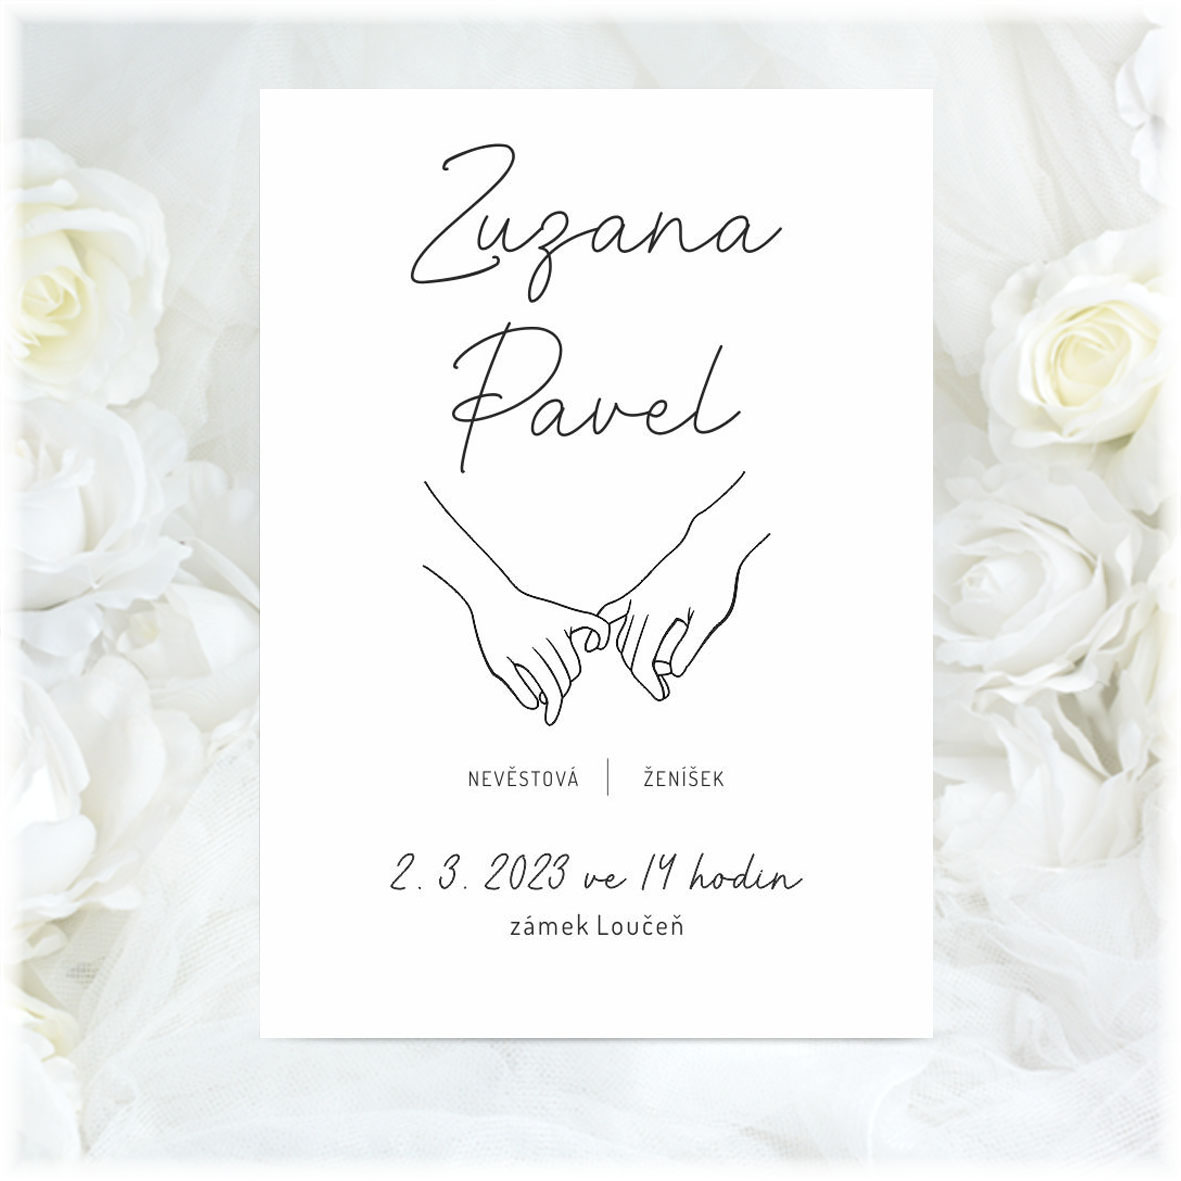 Wedding invitation with outlines holding hands